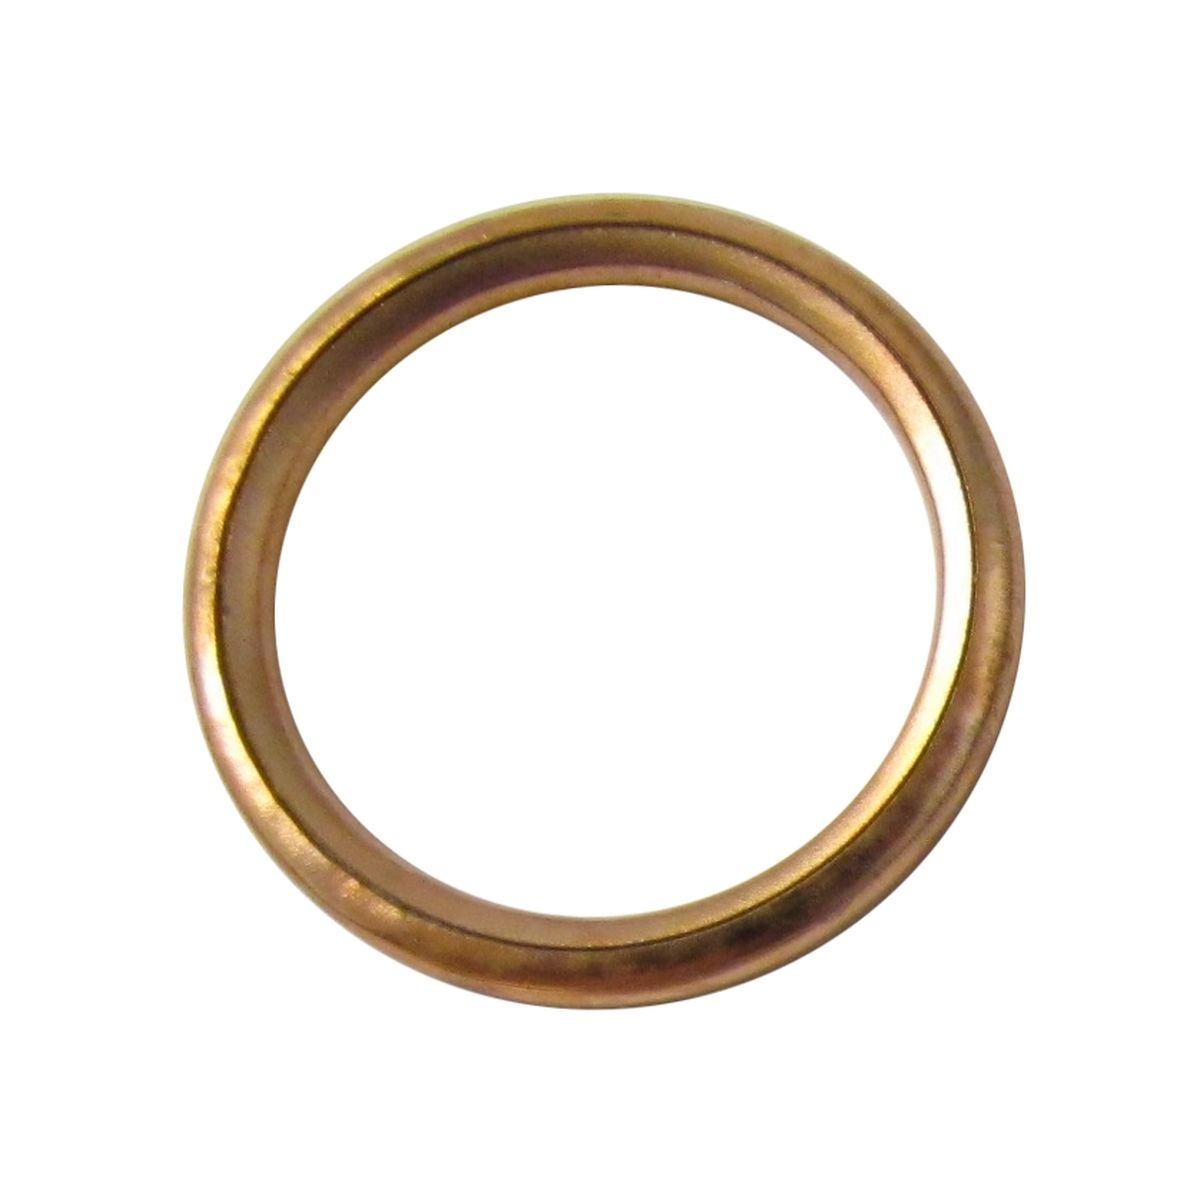 Exhaust Gasket Copper Columbus Mall 1 for 2001 Peugeot 2T WRC TKR2 50 free shipping